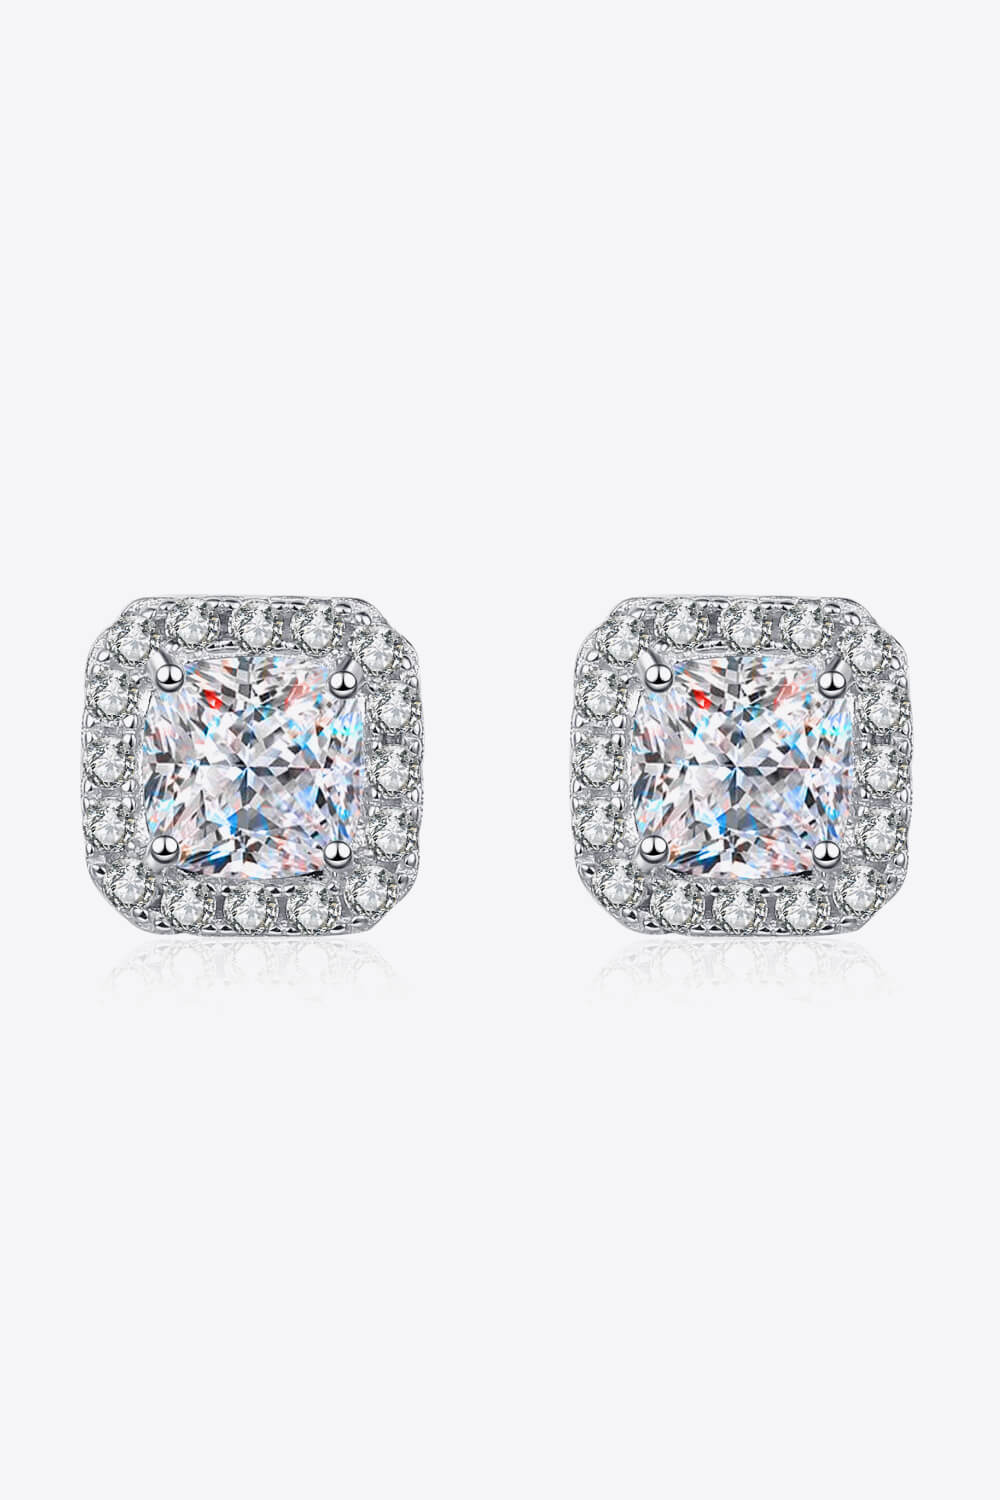 925 Sterling Silver Inlaid 2 Carat Moissanite Square Stud Earrings - Tophatter Deals